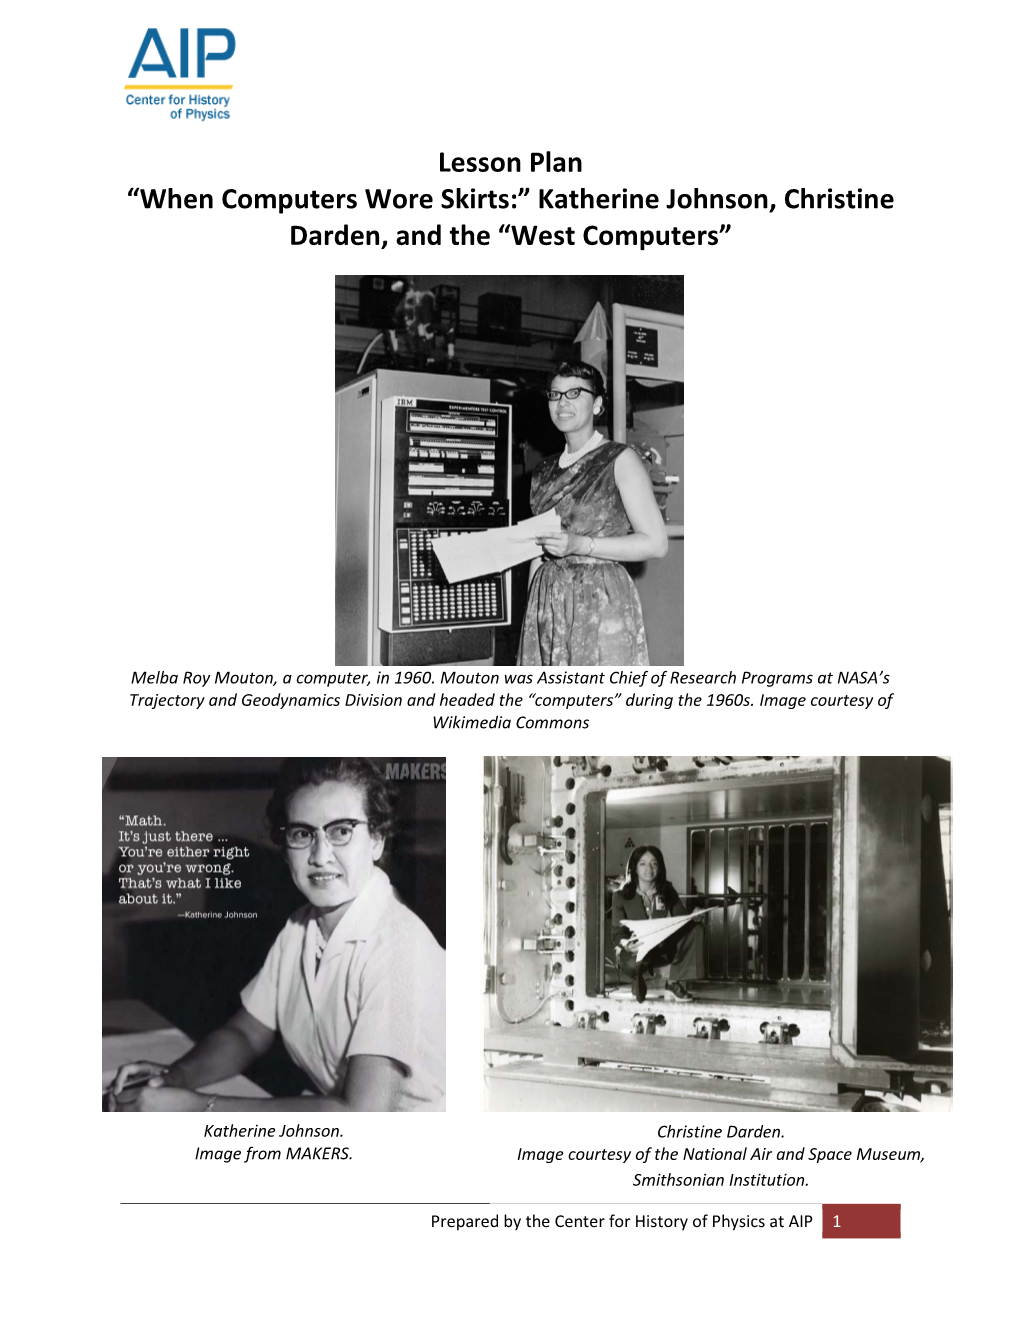 Katherine Johnson, Christine Darden, and the “West Computers”